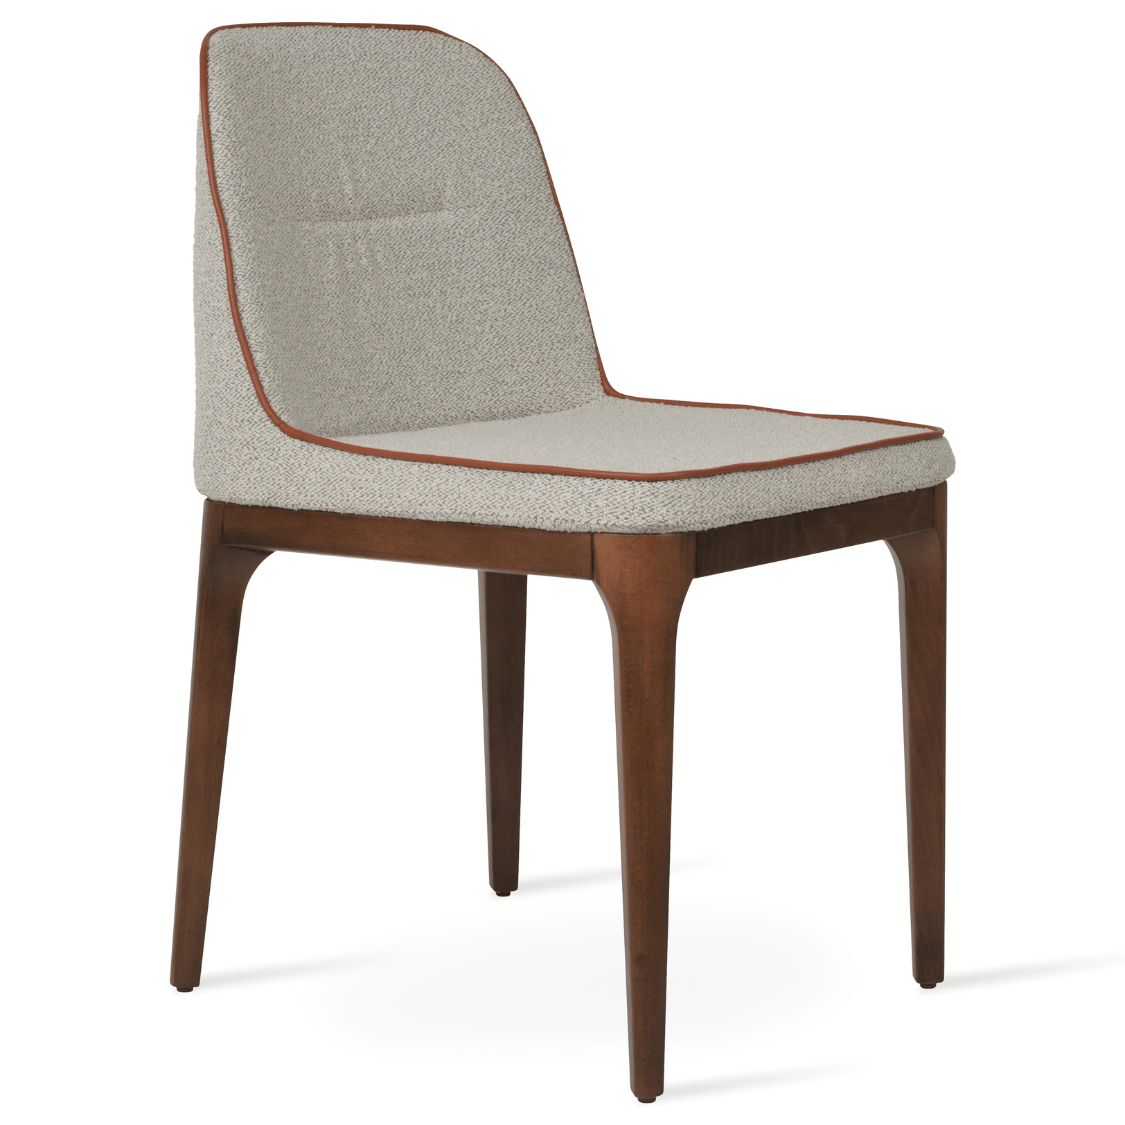 London Upholstered Side Chair - Your Bar Stools Canada